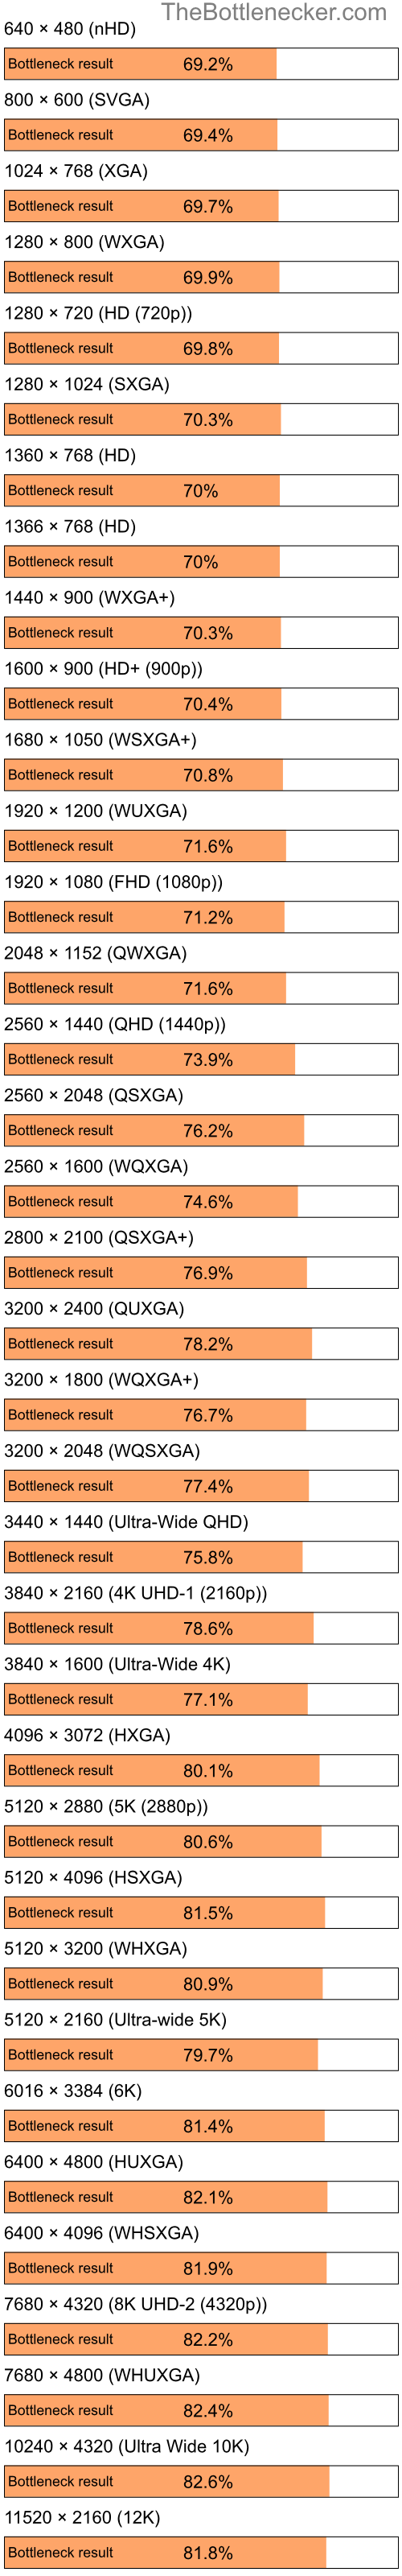 Bottleneck results by resolution for Intel Atom Z520 and NVIDIA GeForce 8300 in Graphic Card Intense Tasks